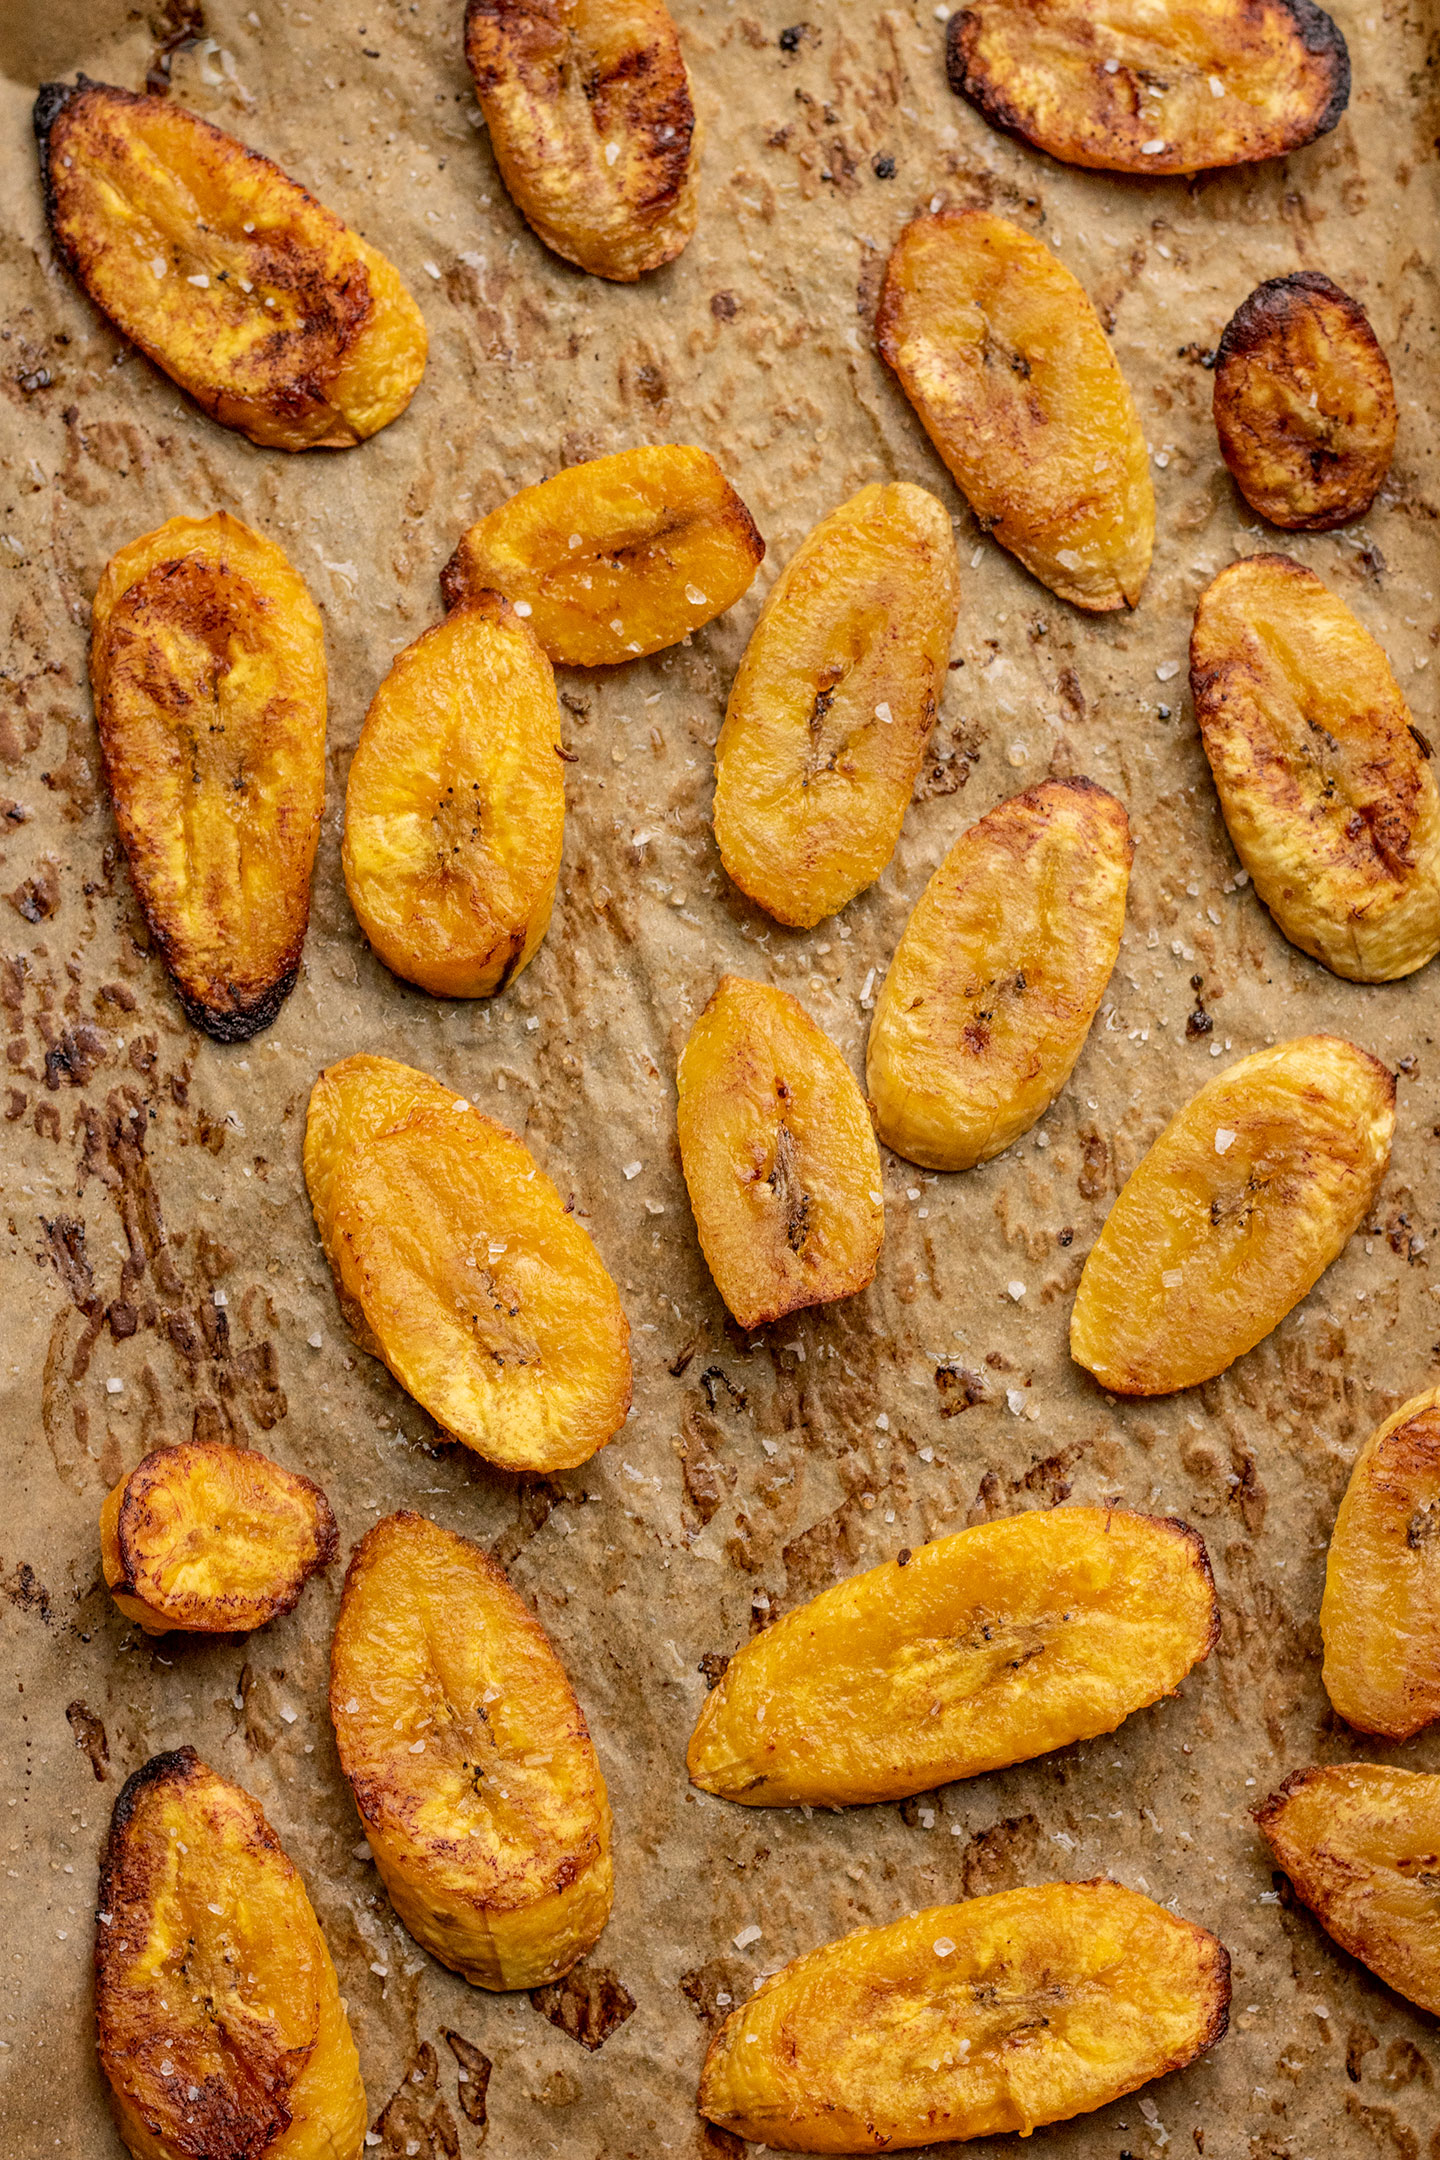 Baked plantain slices on a parchment lined baking tray.